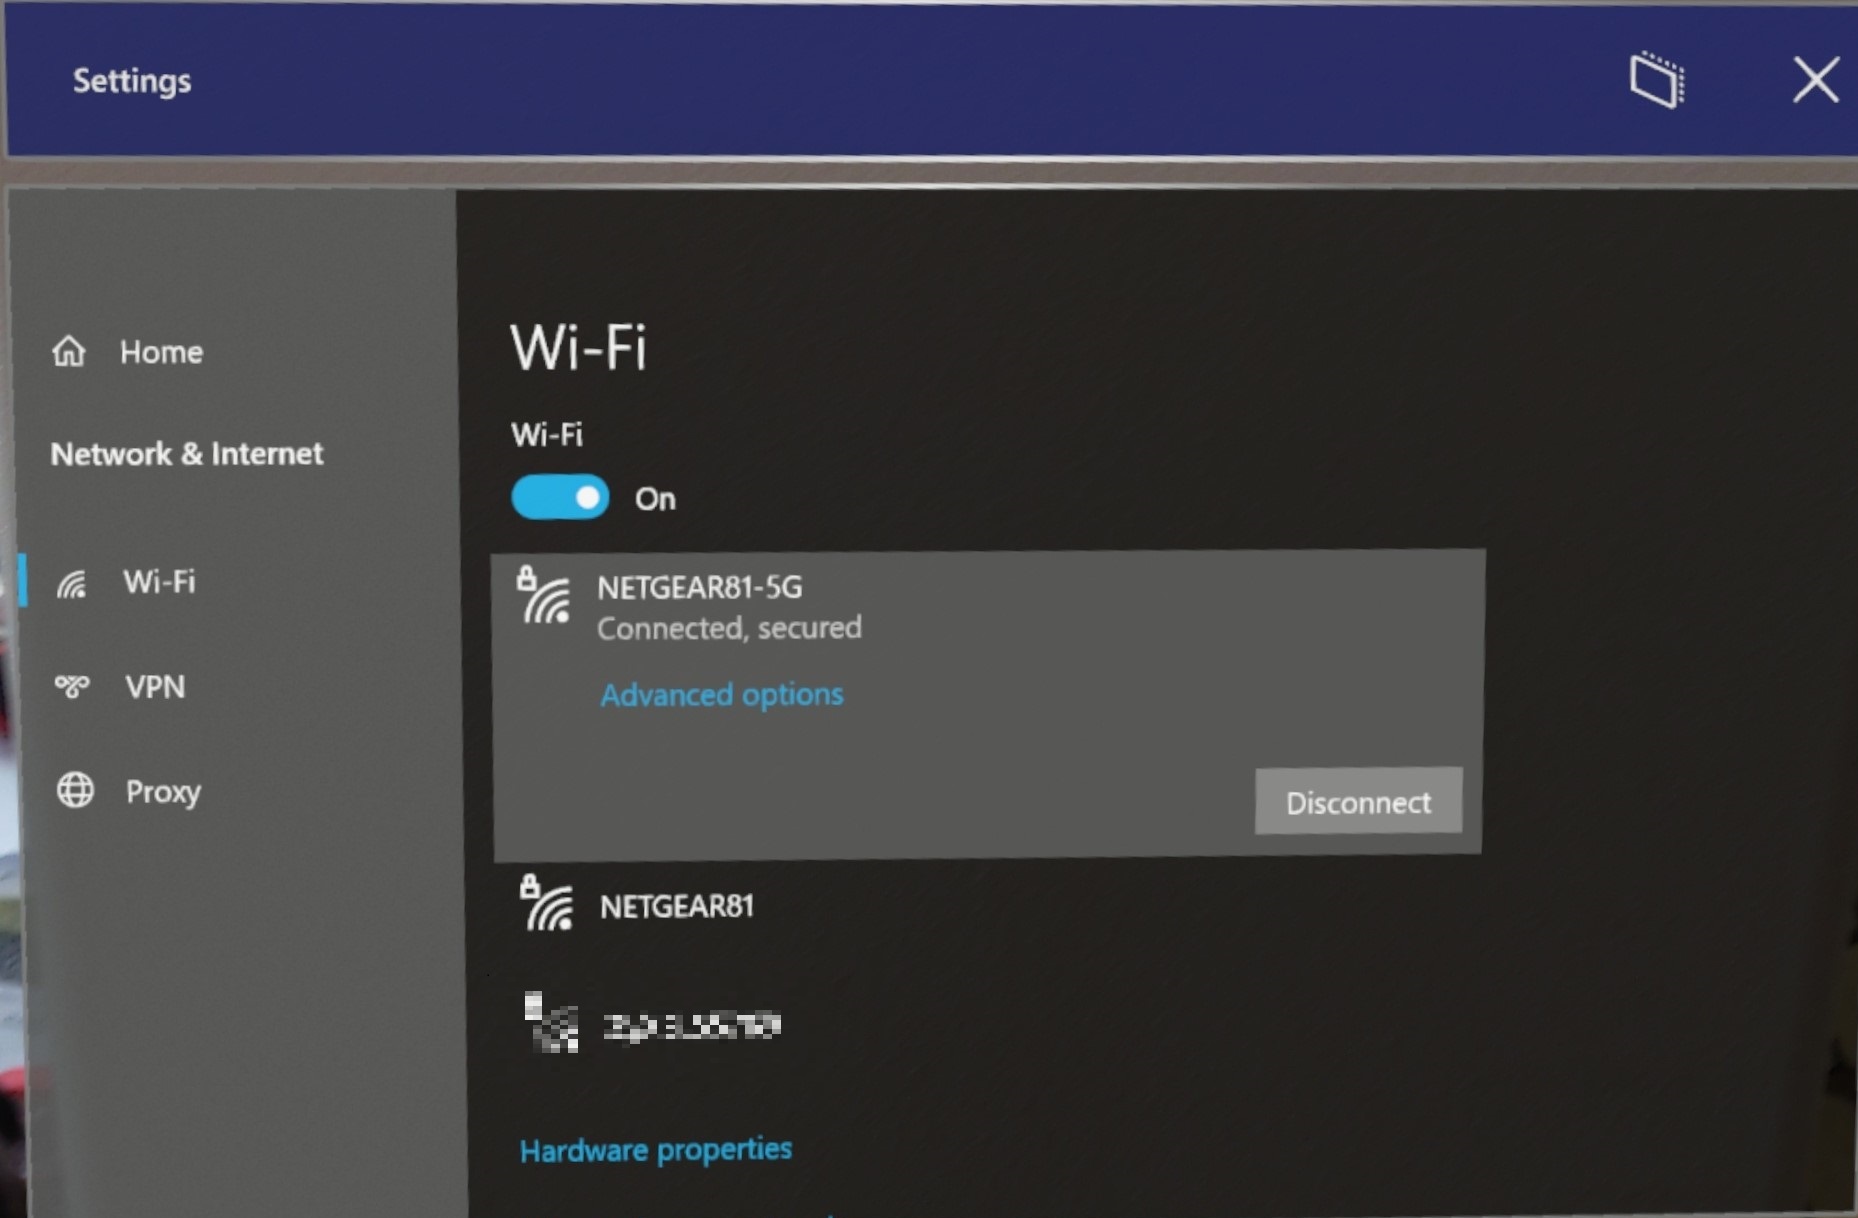 Scroll down and find the Wi-Fi Assist option.
Toggle the Wi-Fi Assist switch to the off position.